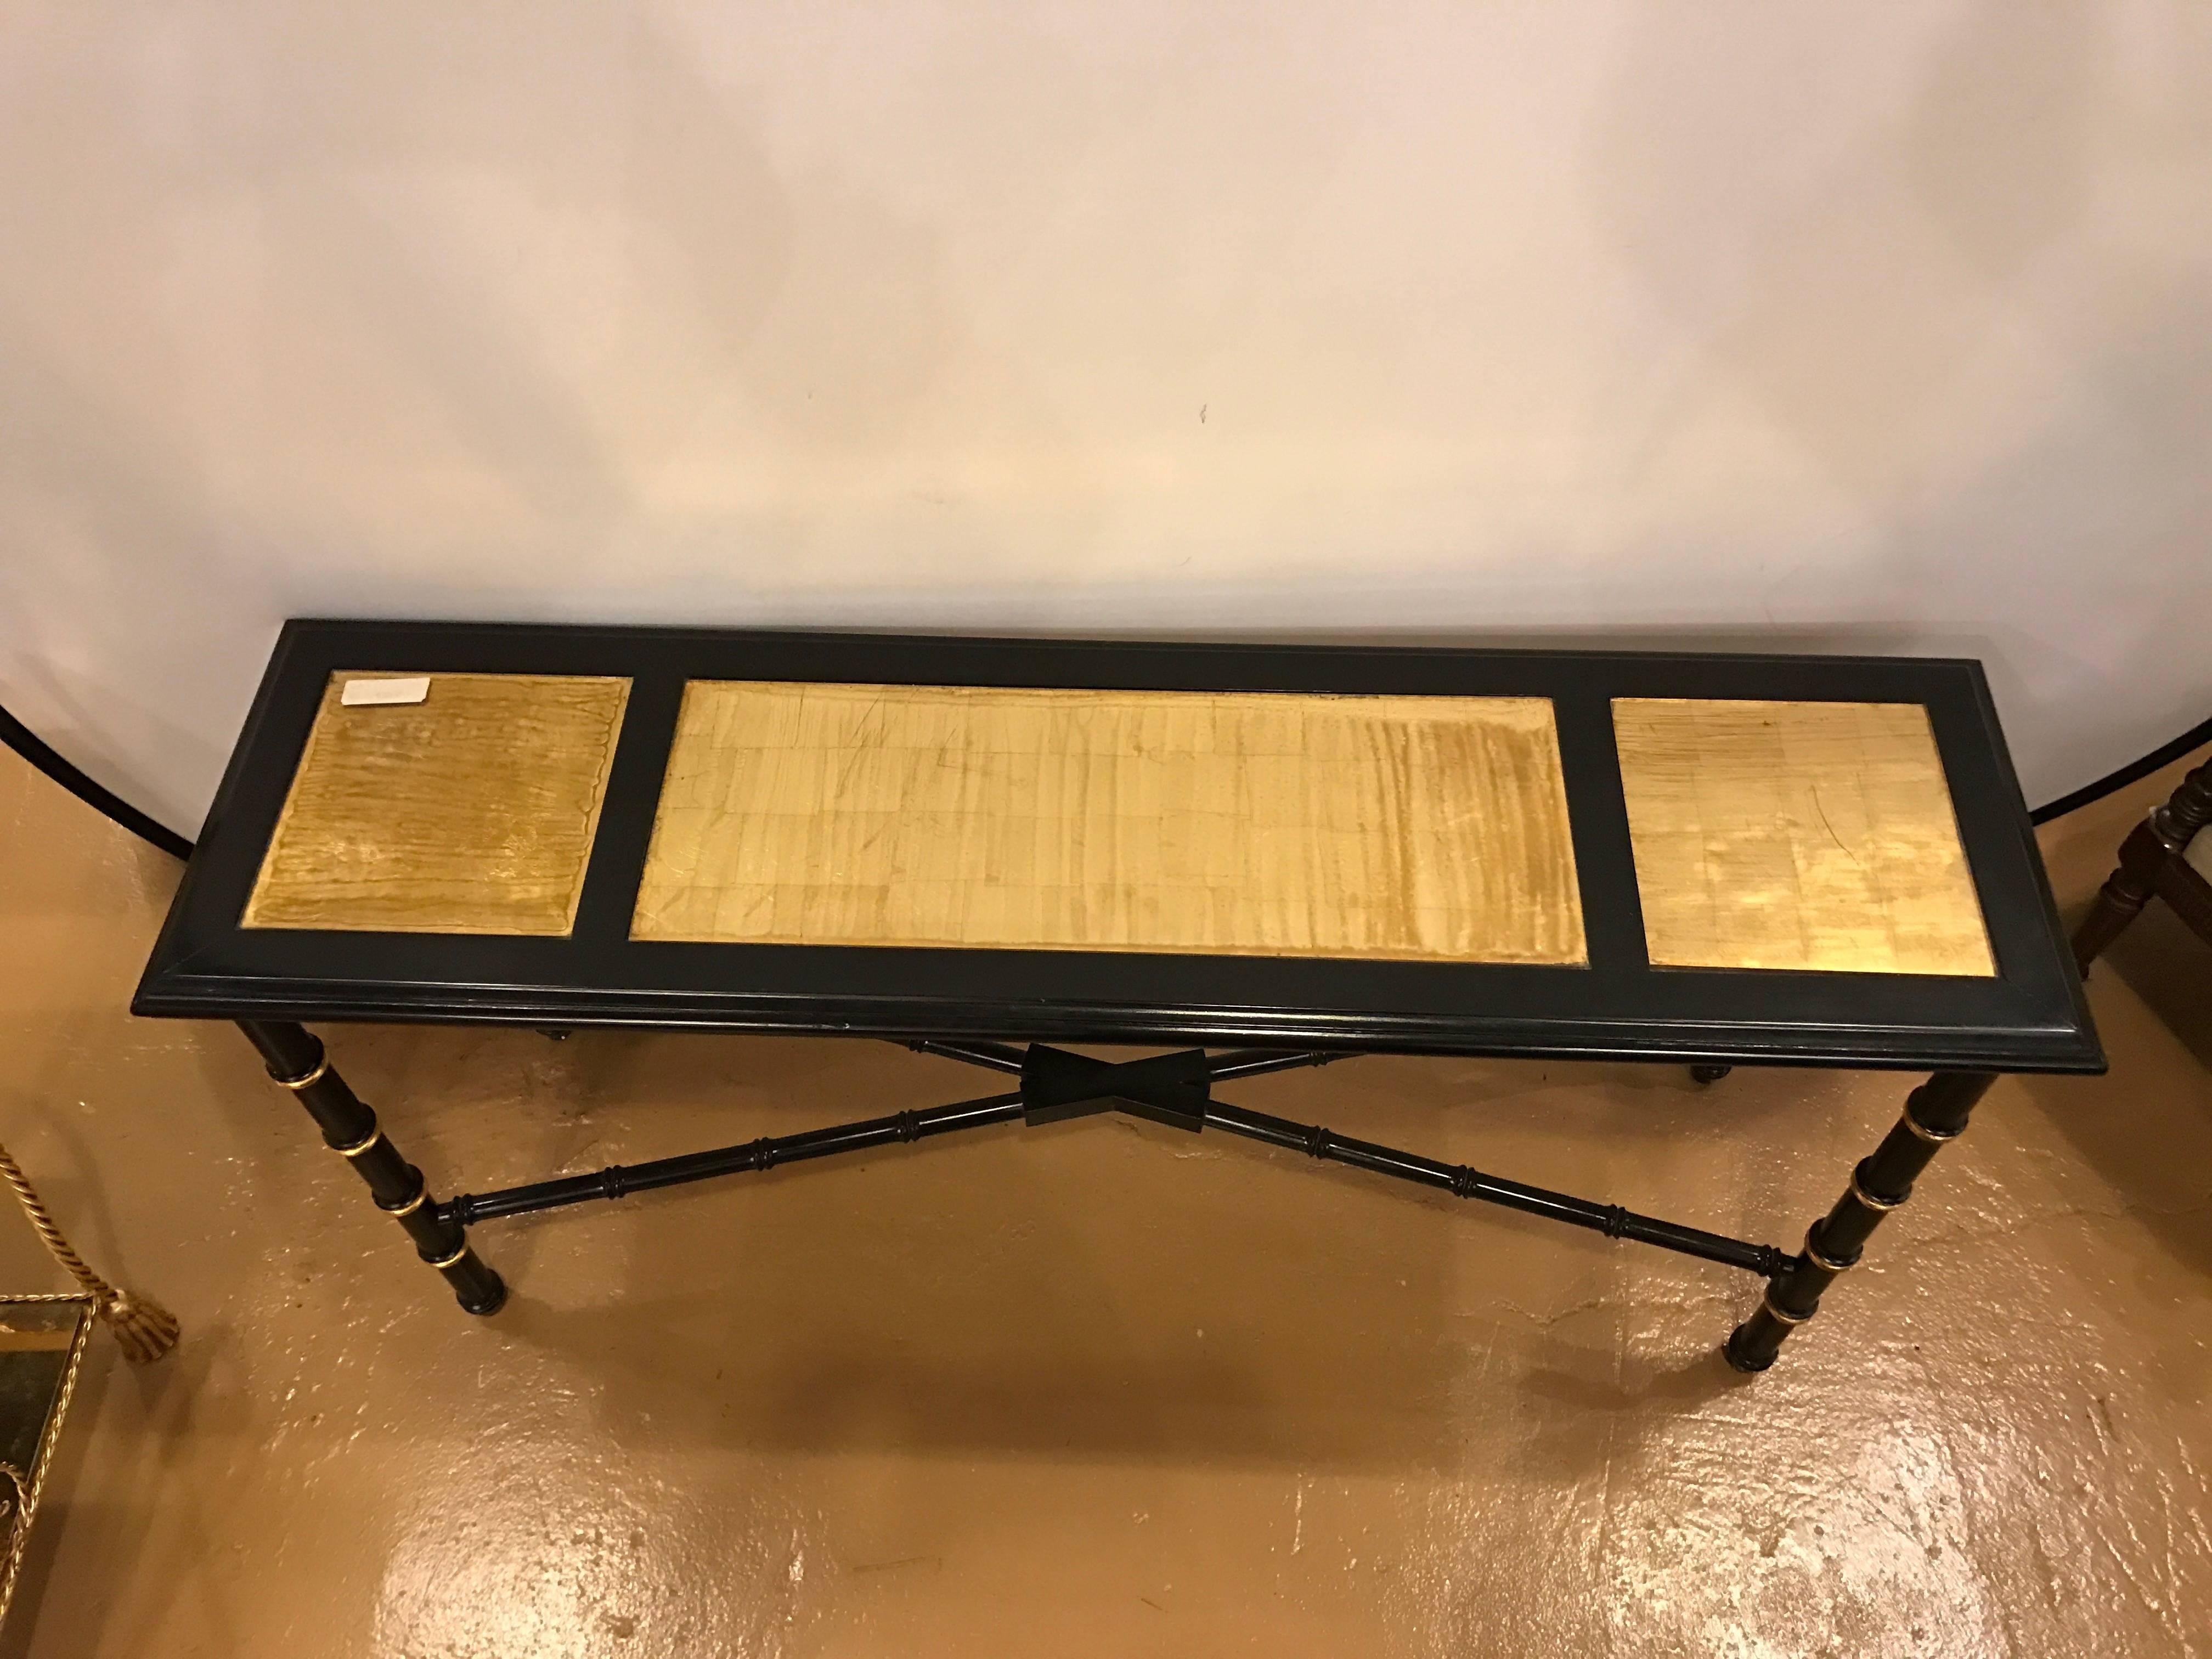 An ebonized faux bamboo and gilt gold console or serving table. The group of three gilt gold glass panels framed with ebony wood. The top supported by a group of faux bamboo and gilt gold legs held together by a faux bamboo X-shaped undercarriage.